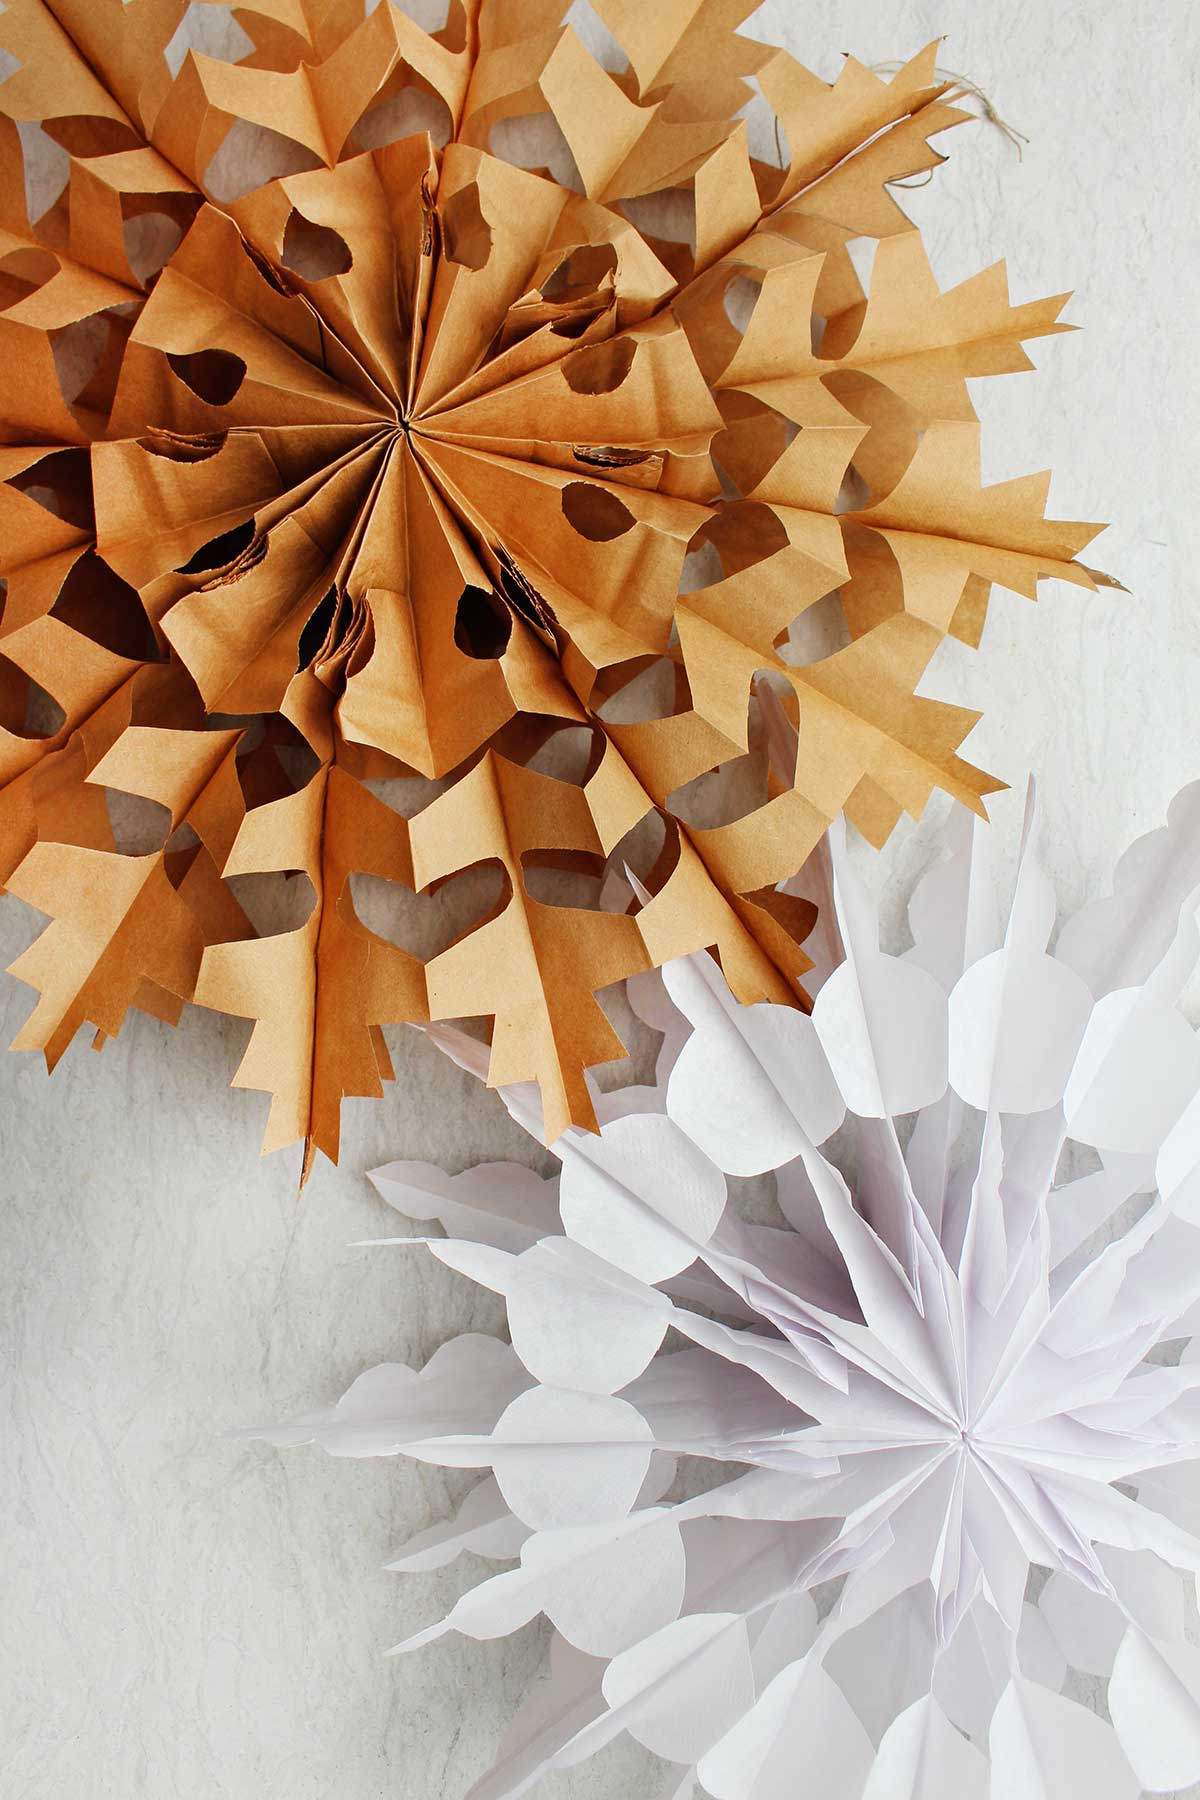 Easy Paper Snowflake Tutorial /Toilet Paper Roll Winter Ornaments /  Recycling Decorations DIY 